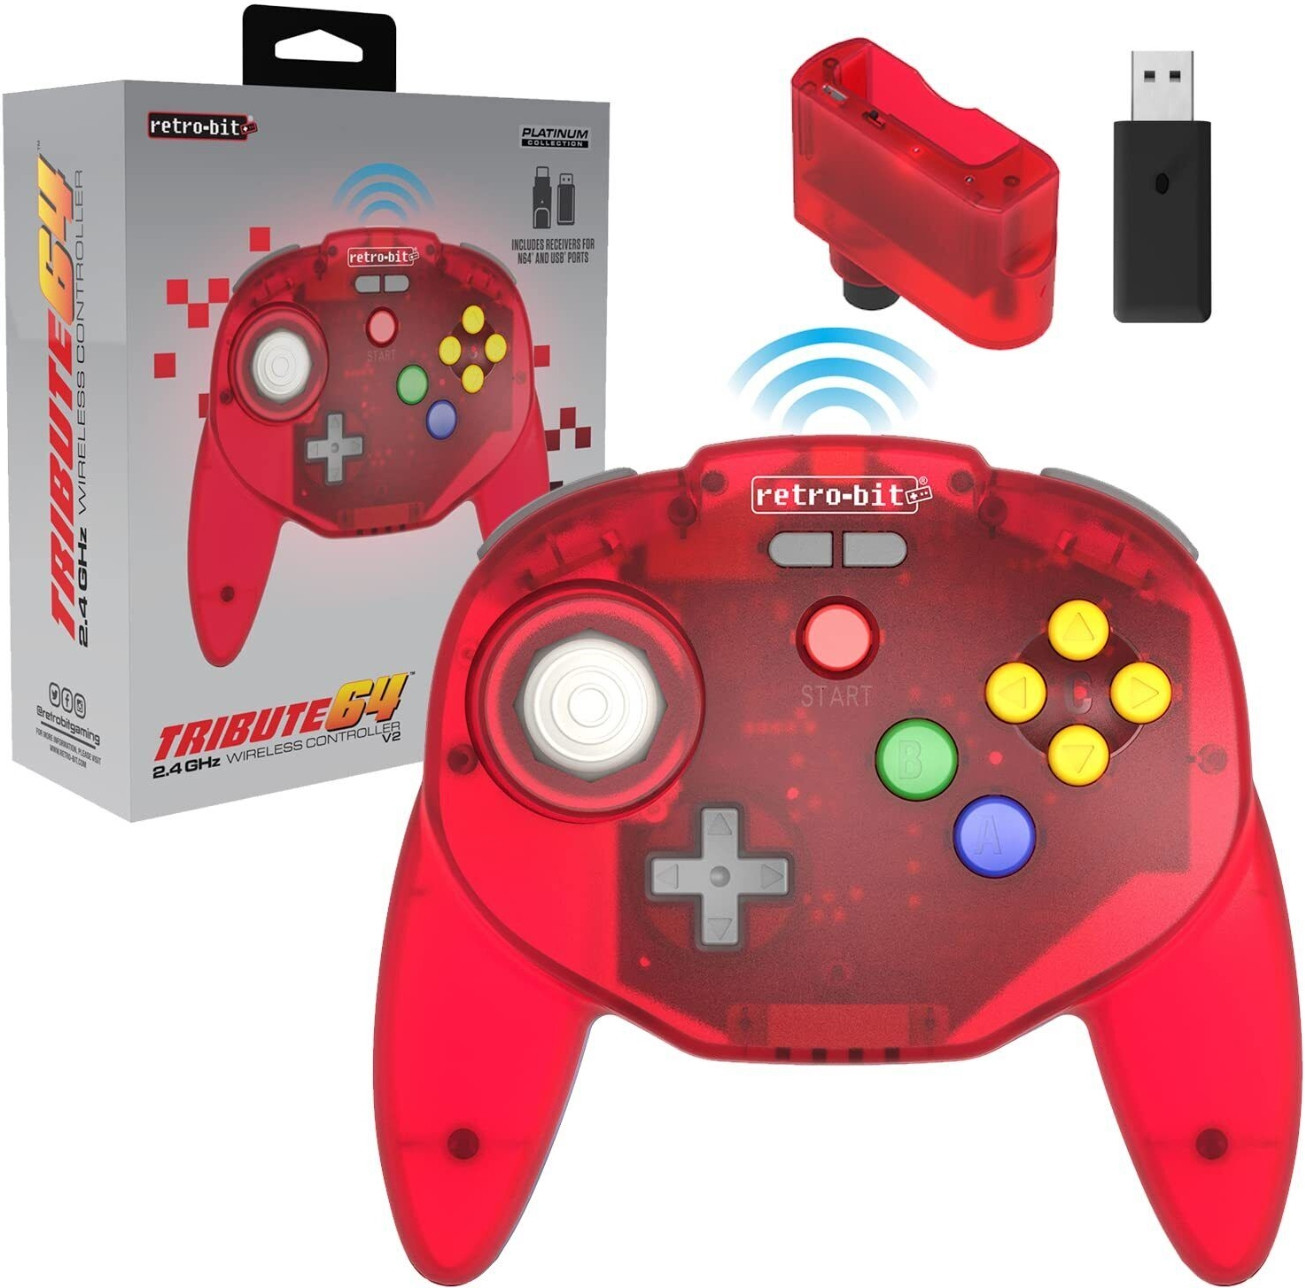 Tribute 64 2.4 GHz Wireless Controller V2 (Red) ()